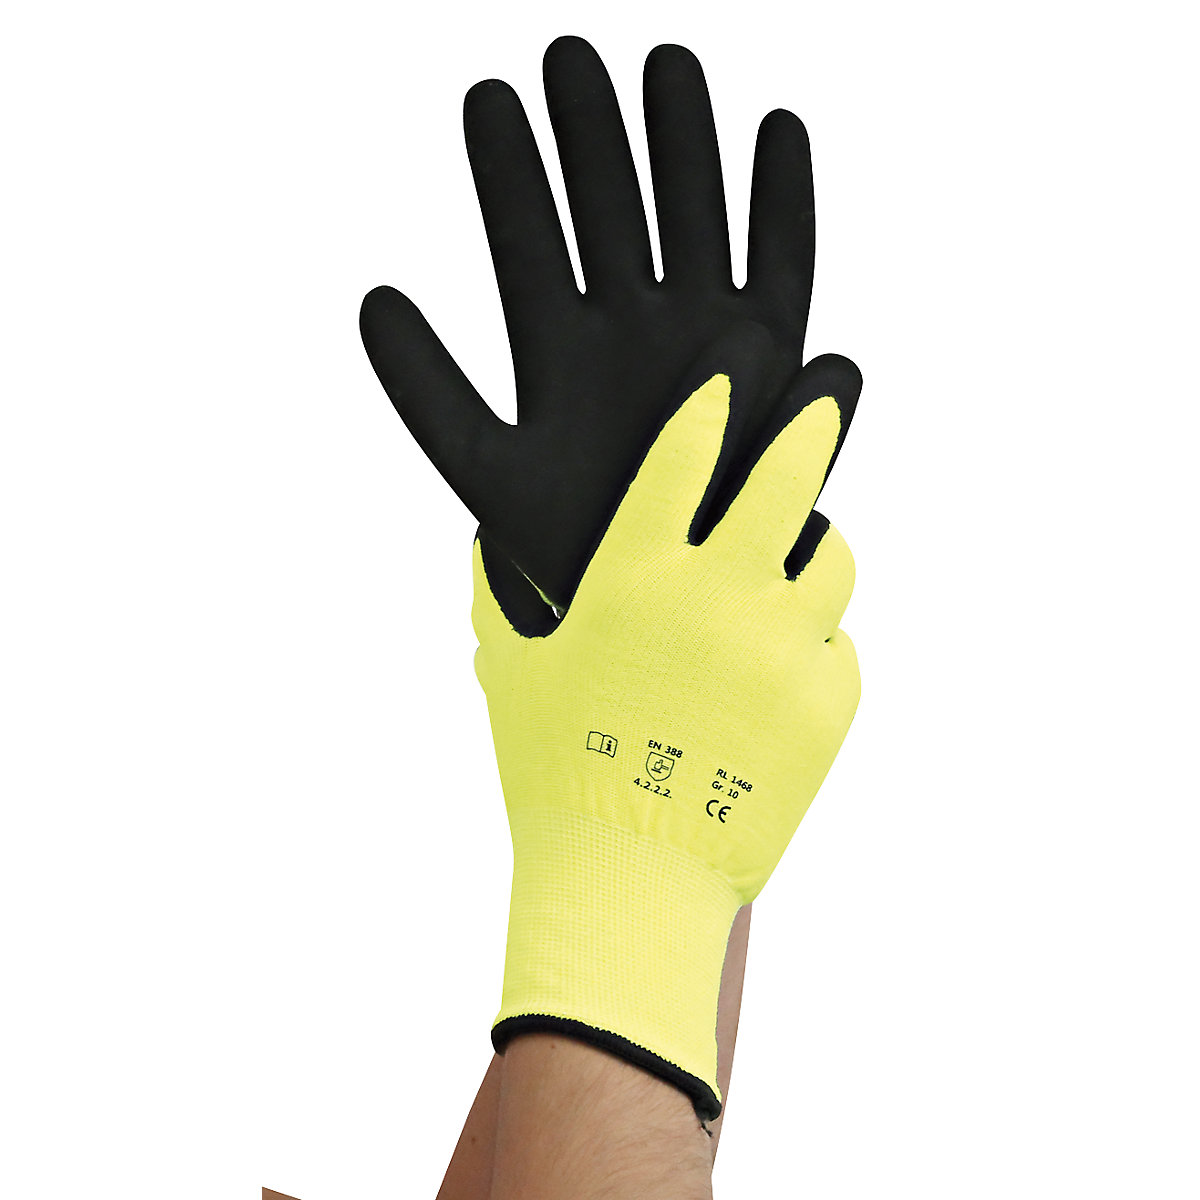 WINTER STAR NITRIL cold protection gloves